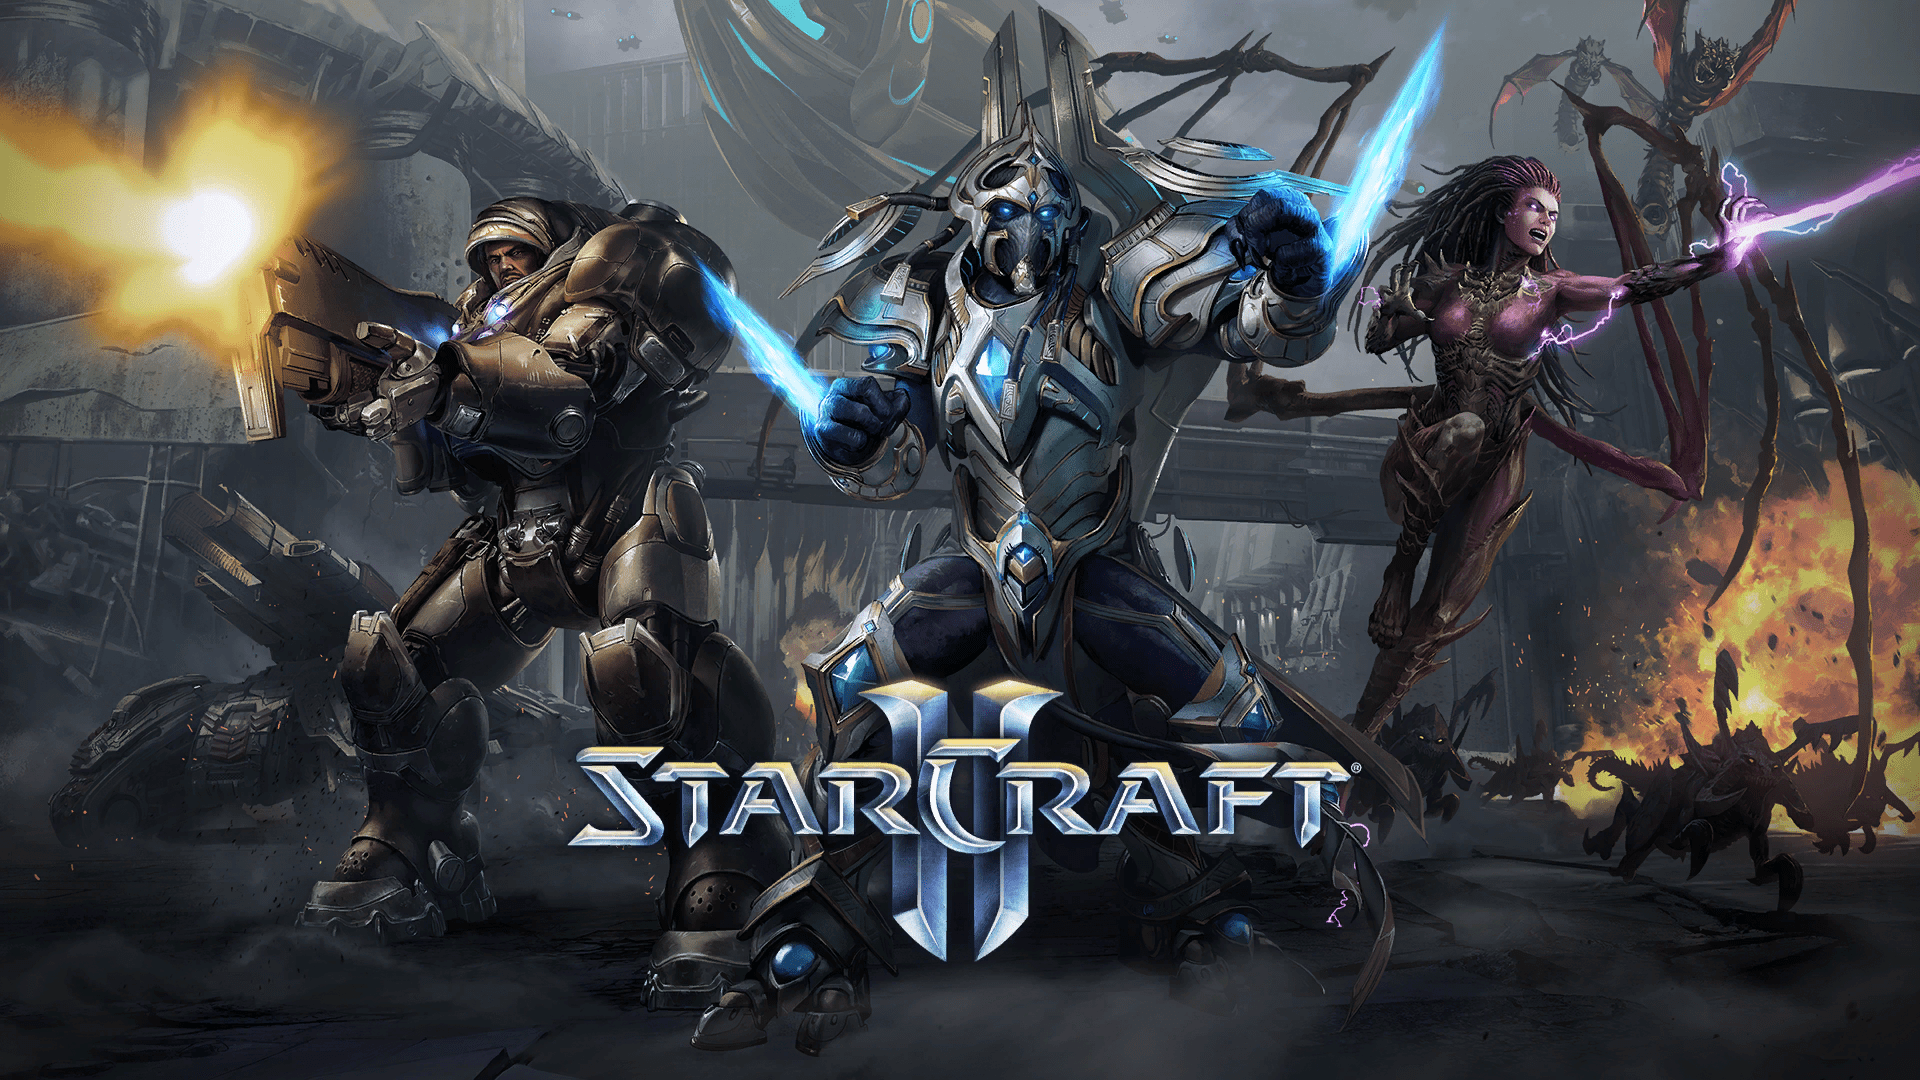 Is Blizzard still going to follow through with Starcraft 3?